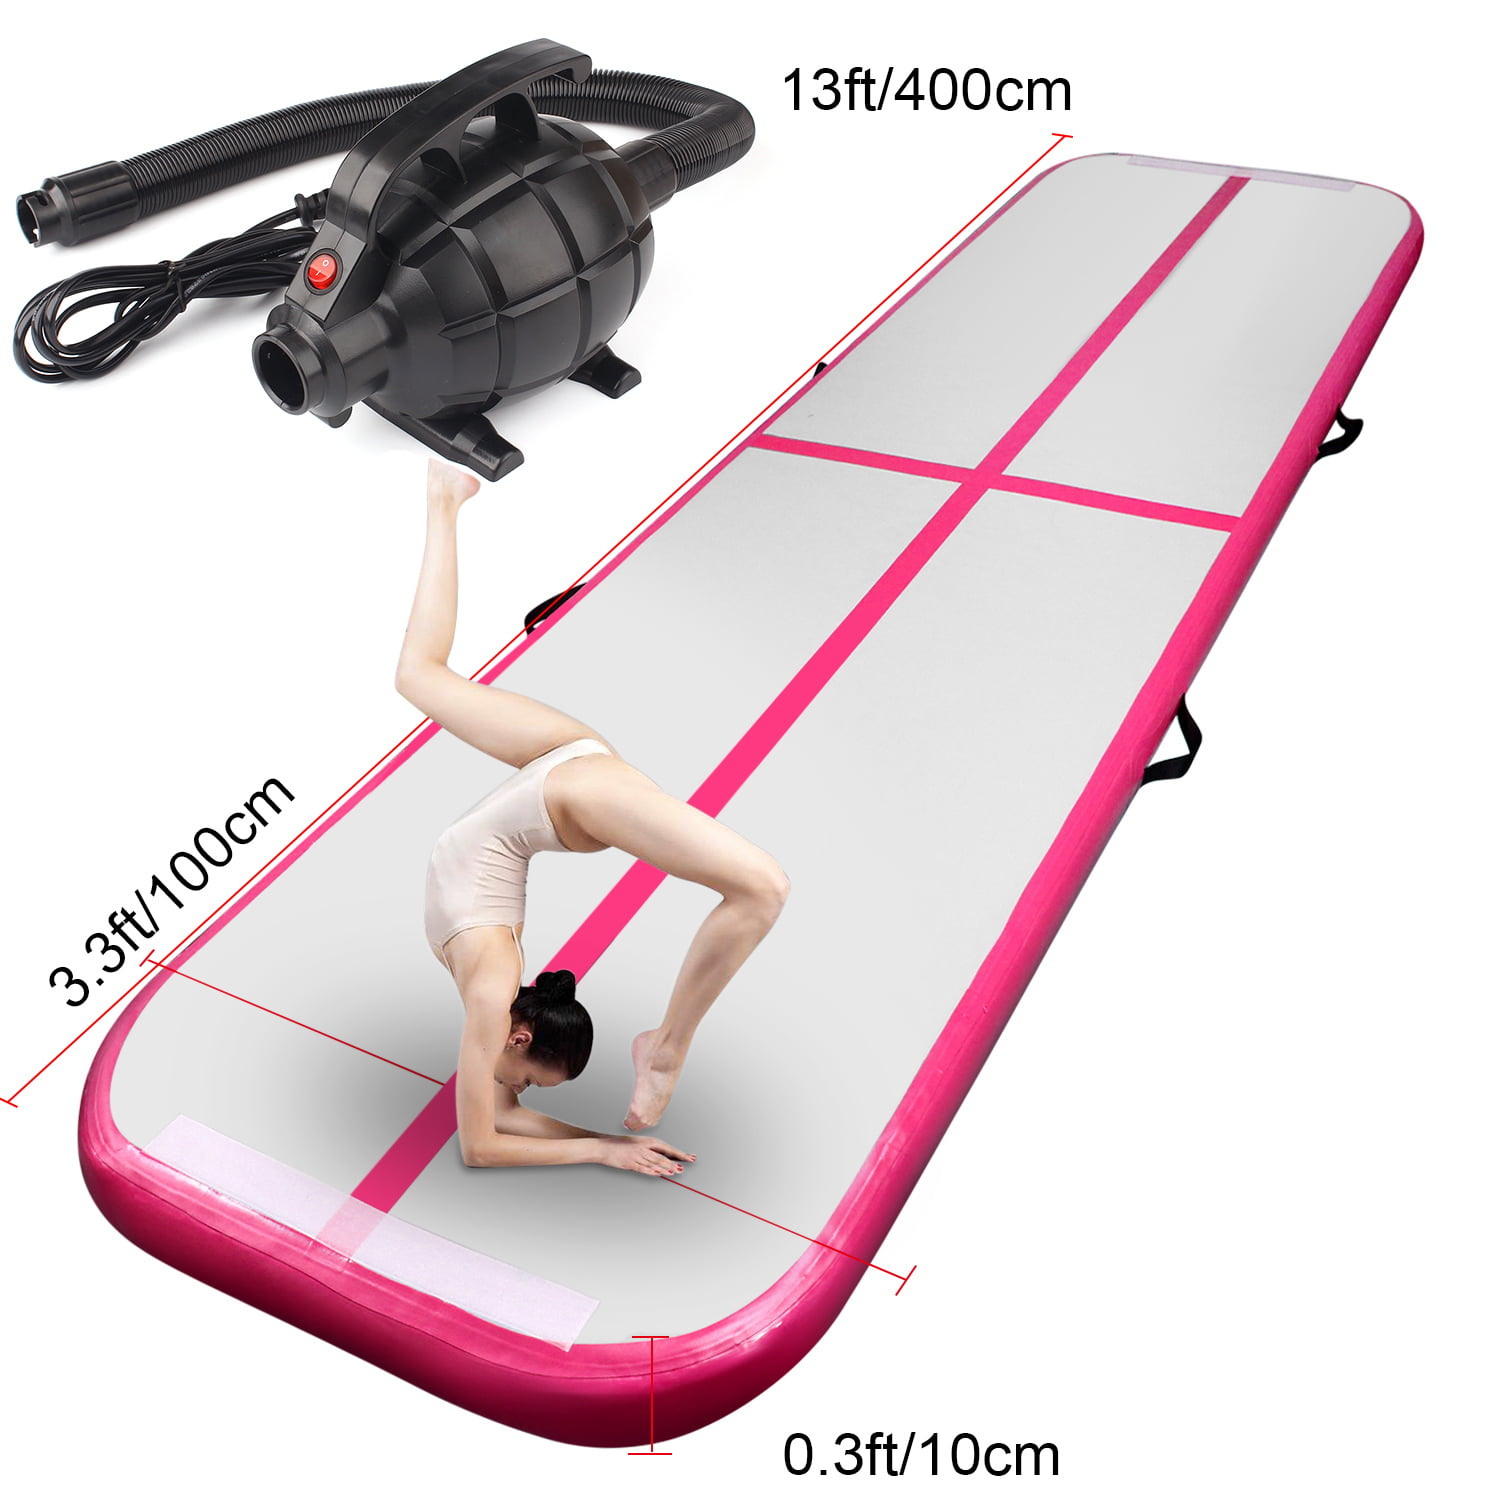 FBSPORT 13ft/16ft/20ft/23ft/26ft Inflatable Gymnastics Air Track Tumbling Mat 4/8 inches Thickness Airtrack Mats for Home Use/Training/Cheerleading/Yoga/Water with Pump 